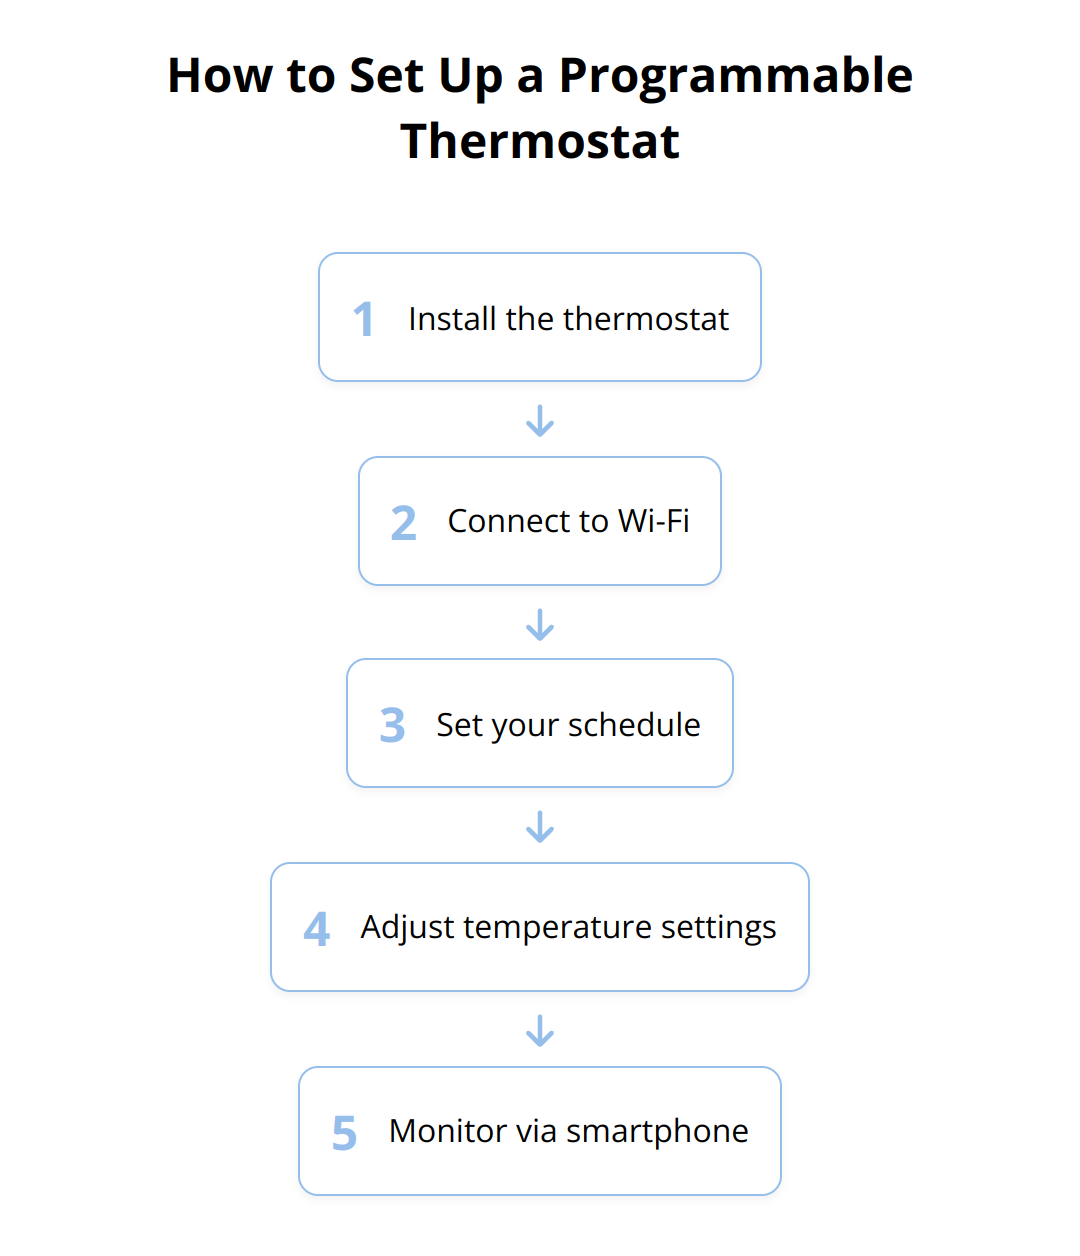 Flow Chart - How to Set Up a Programmable Thermostat